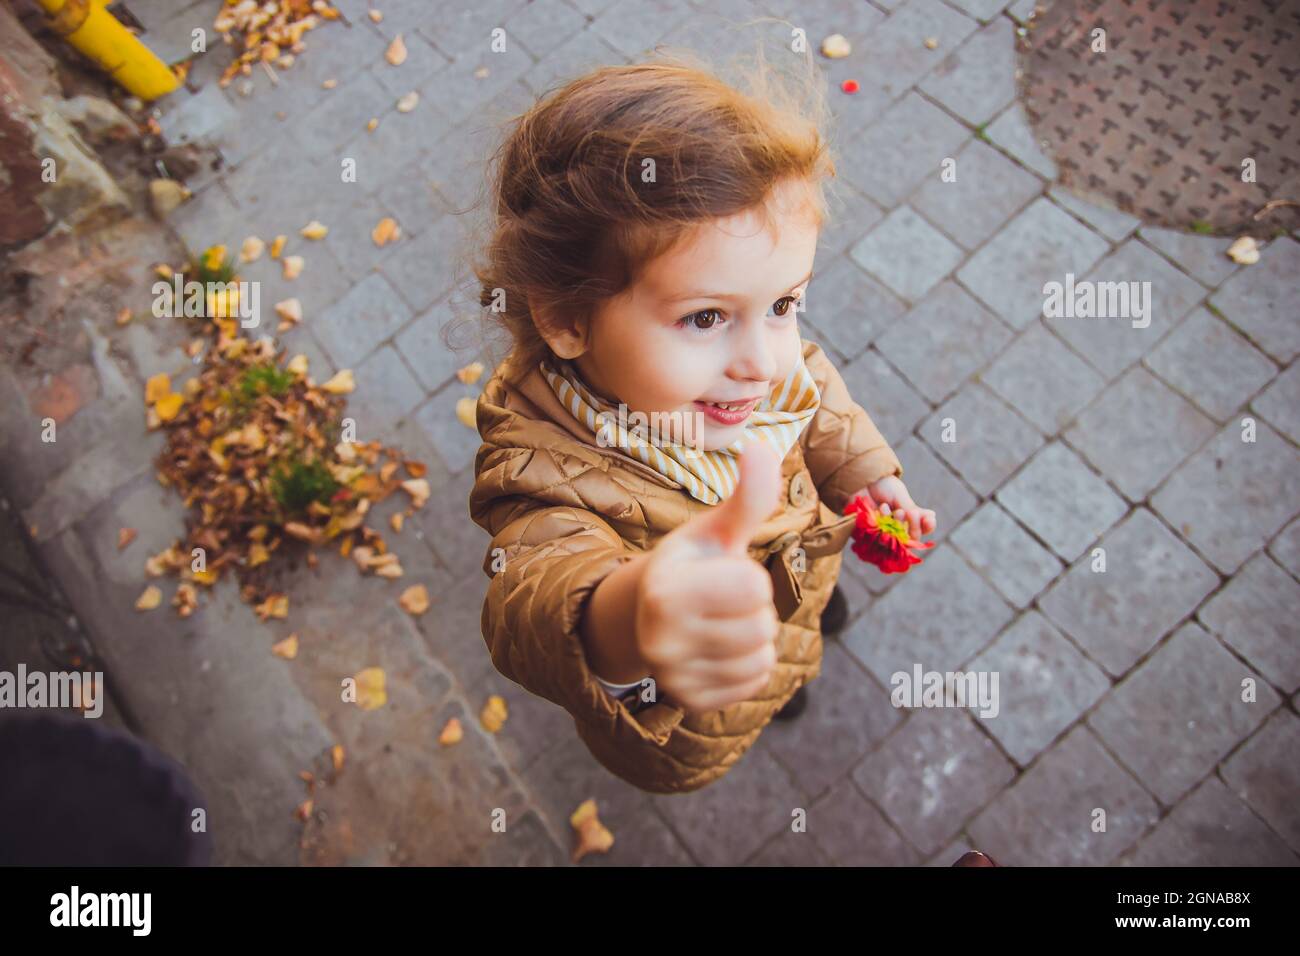 little girl holding a red flower in her hand Stock Photo